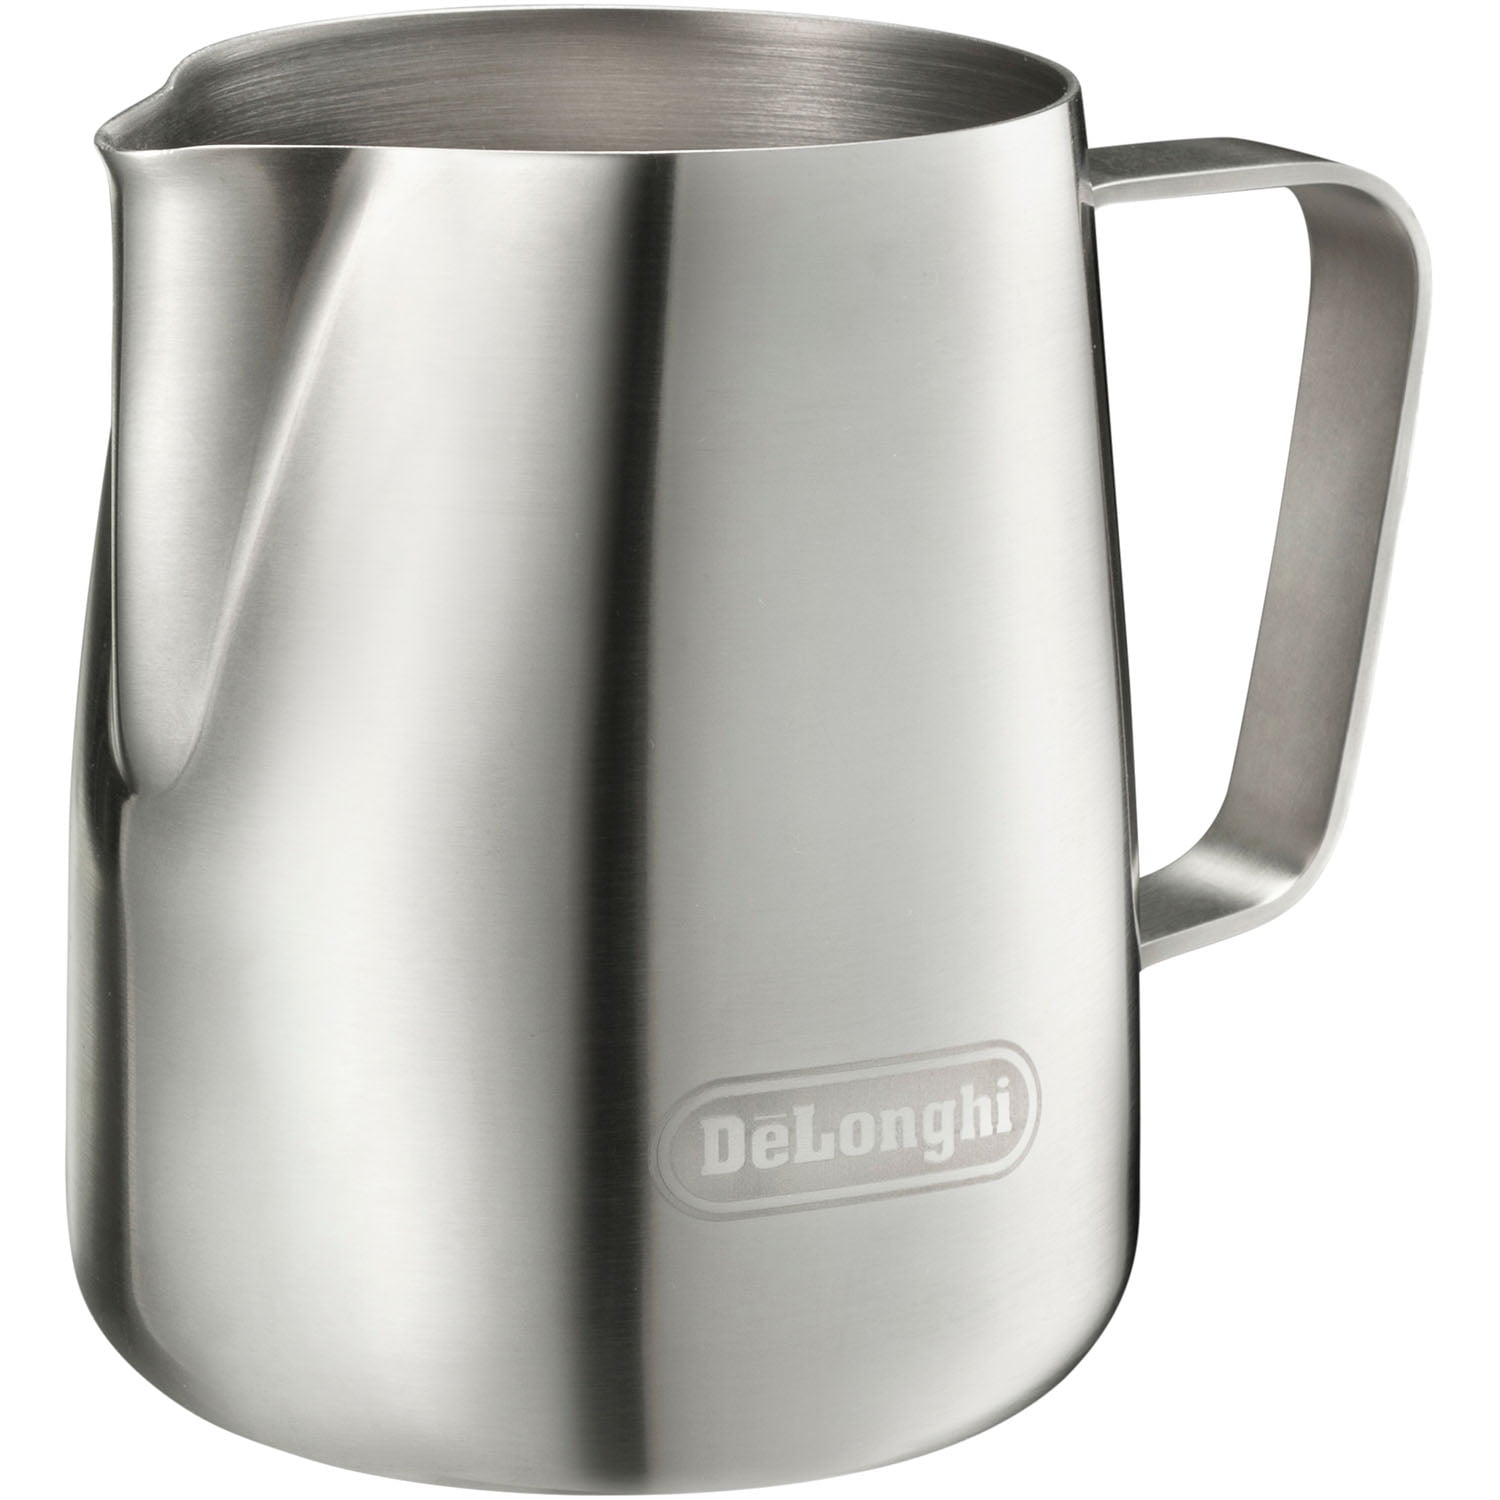  De'Longhi EcoDecalk Descaler, Eco-Friendly Universal Descaling  Solution & Stainless Steel Milk Frothing Pitcher, 12 ounce (350 ml),  Barista Tool, Frother Jug: Home & Kitchen